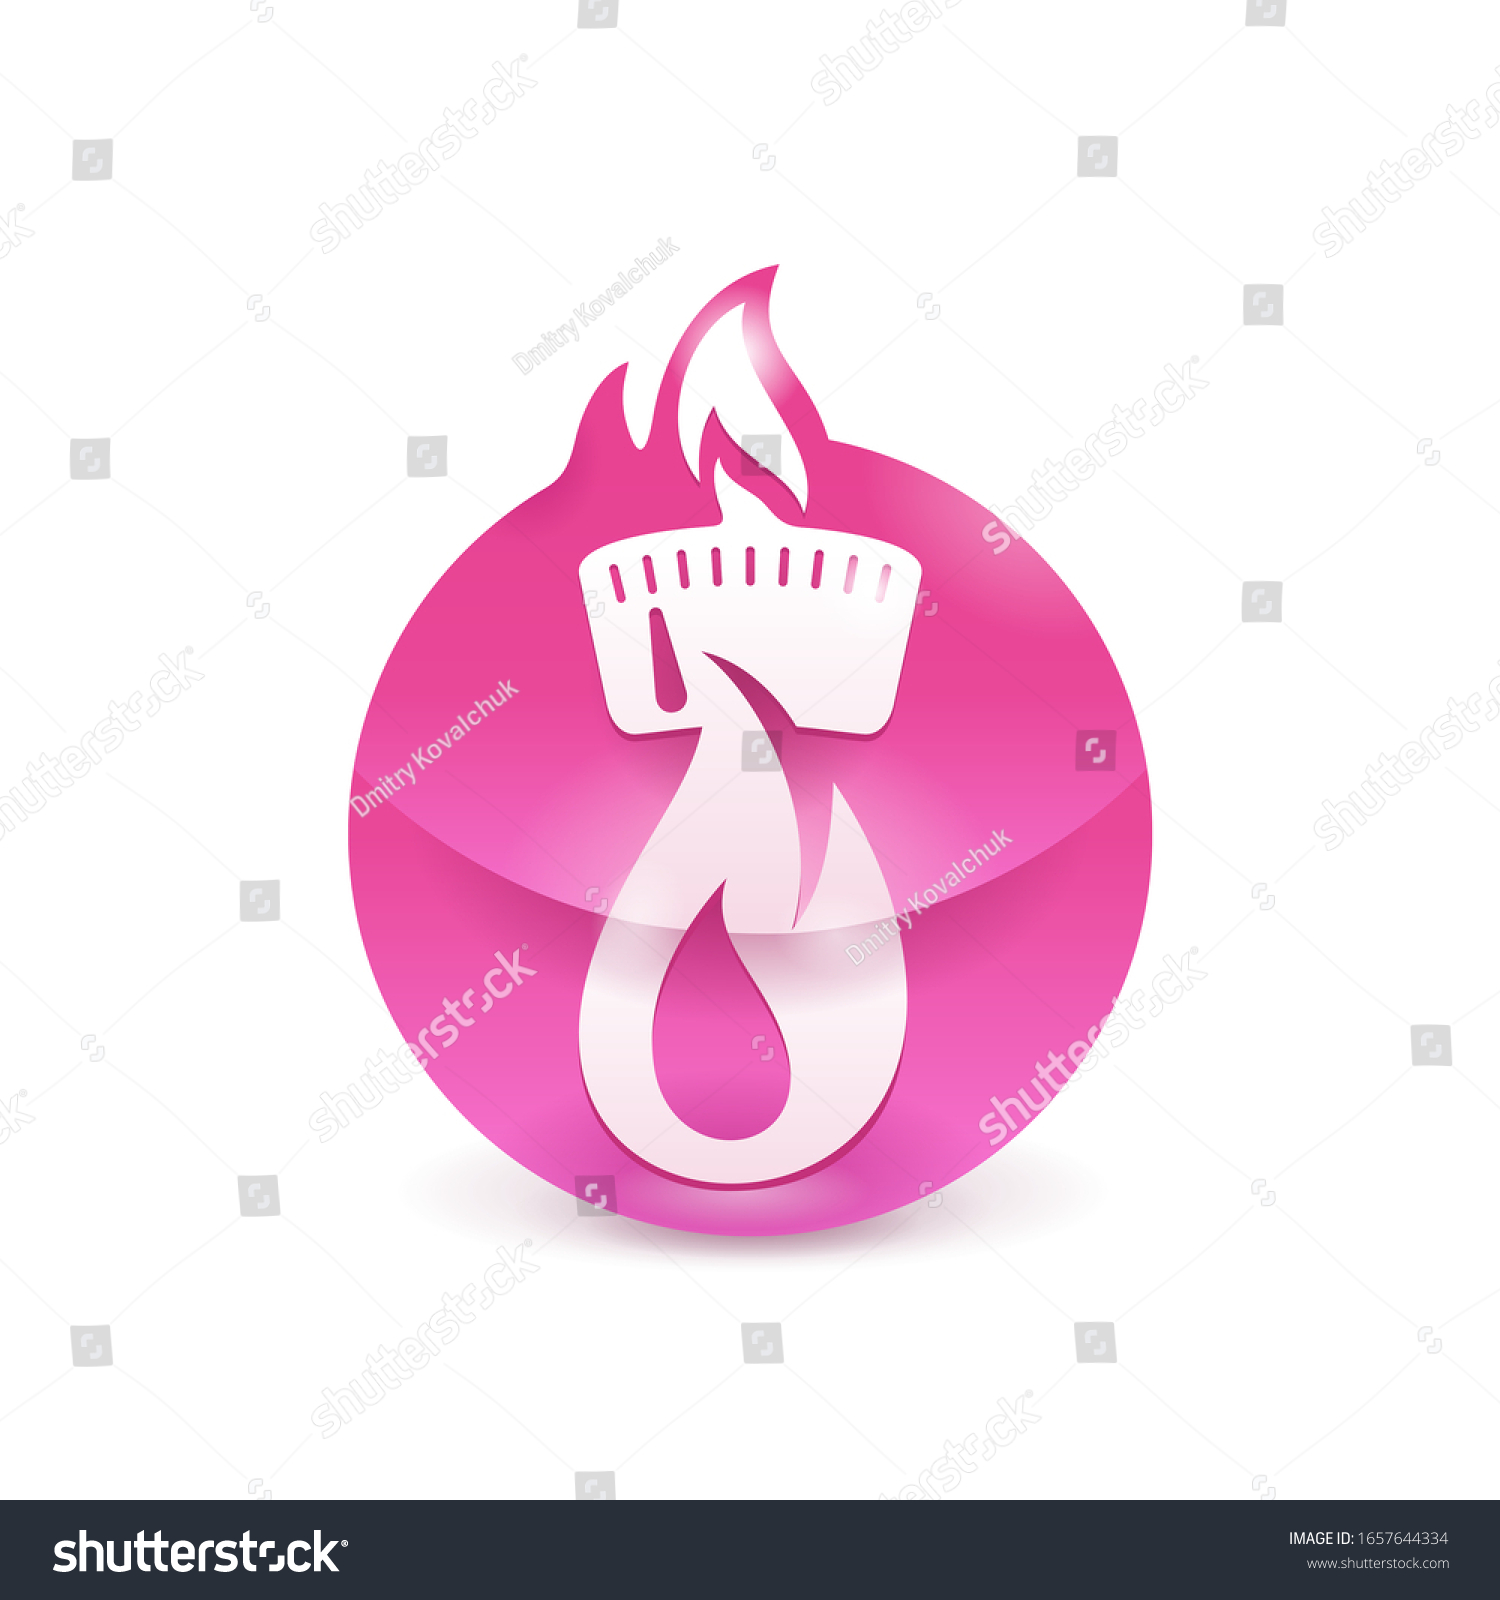 SVG of kcal glossy icon (calories sign) combination of flame (fat burning) and weight scales - isolated vector emblem for healthy food, fitness or diet program packaging svg